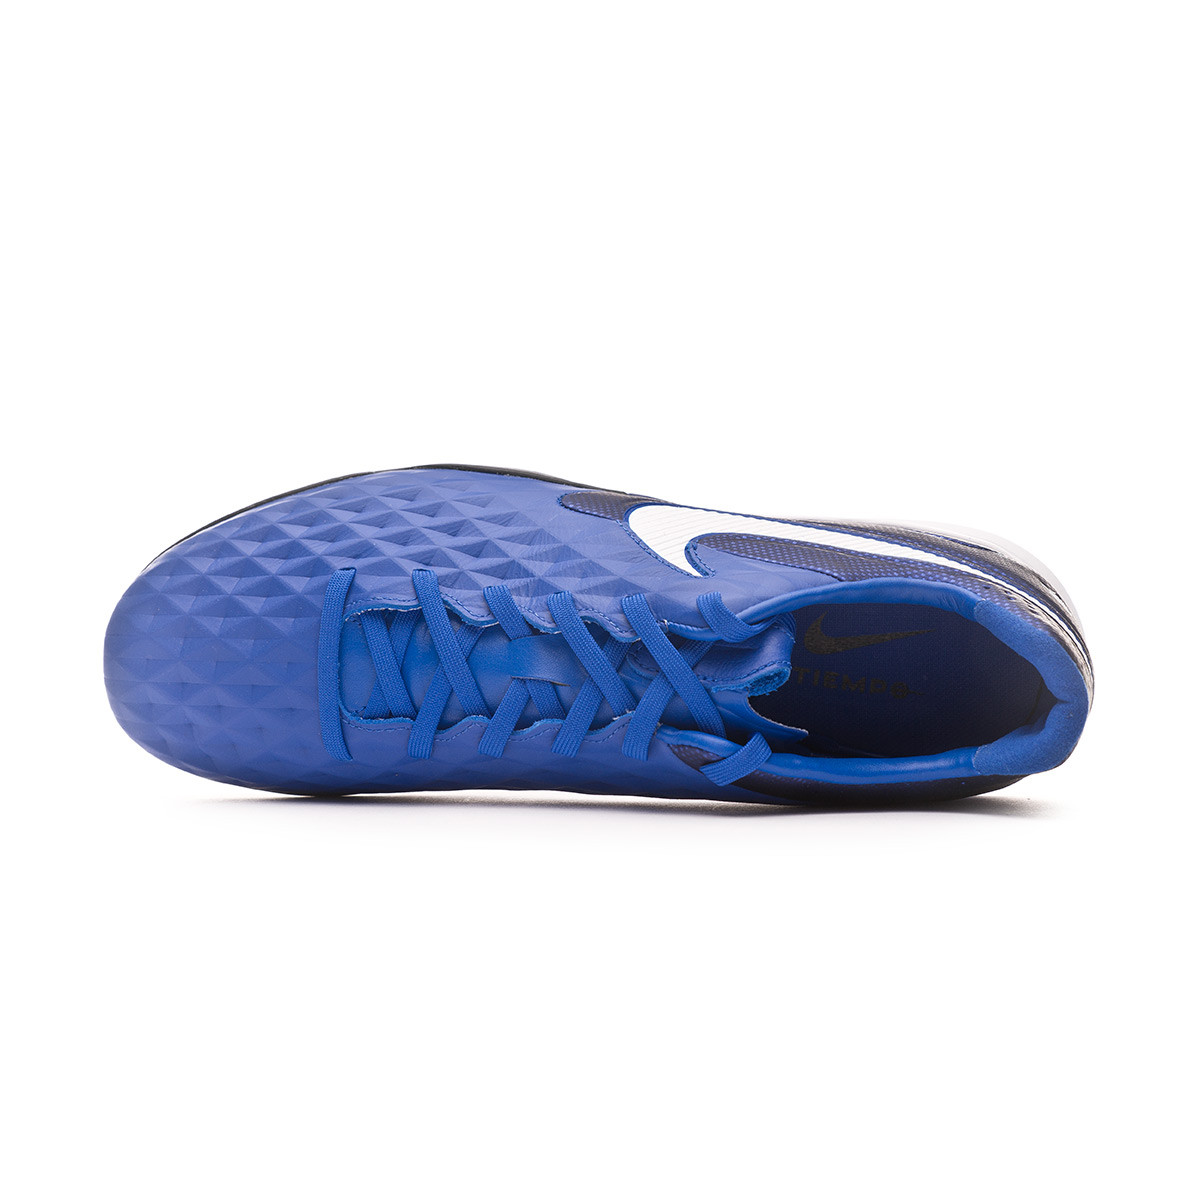 Pike shoes Nike Time Legend 8 Academy IC AT6099 061